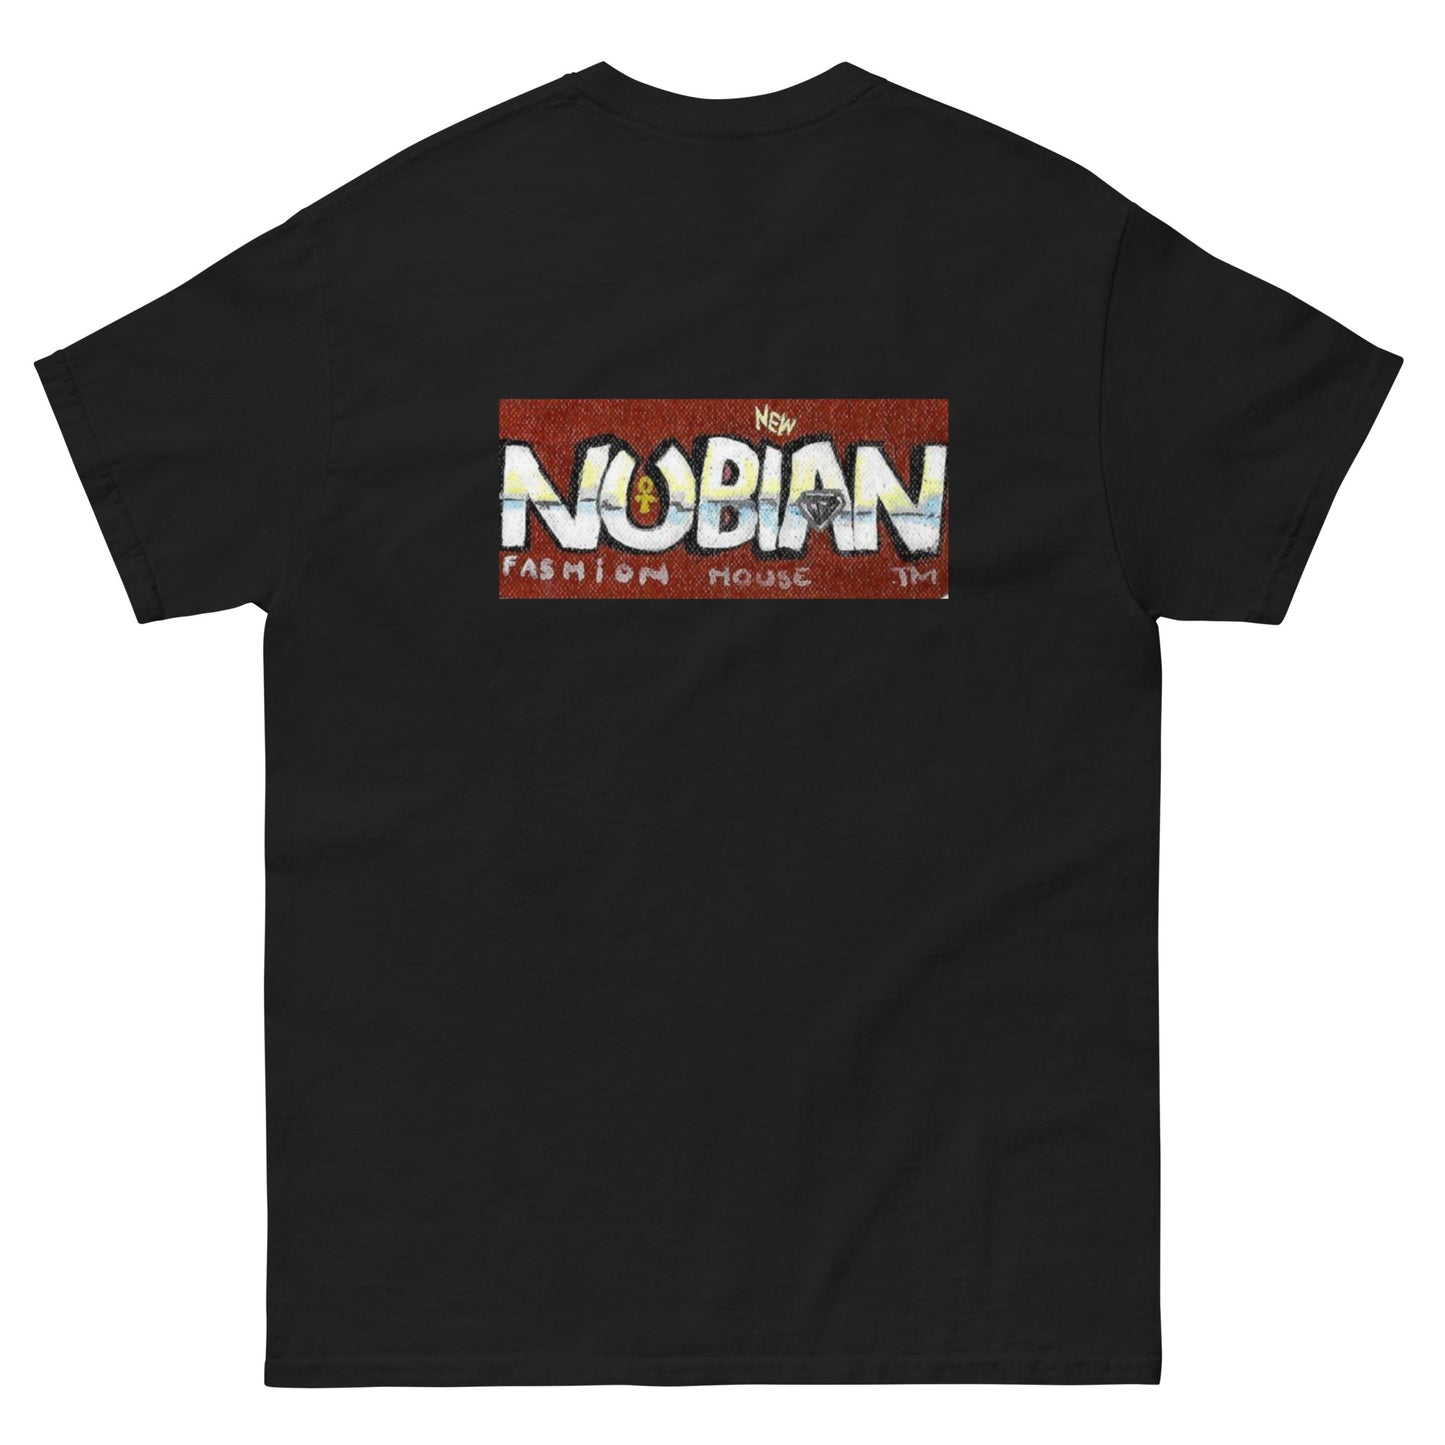 No More Baby Daddy's classic tee